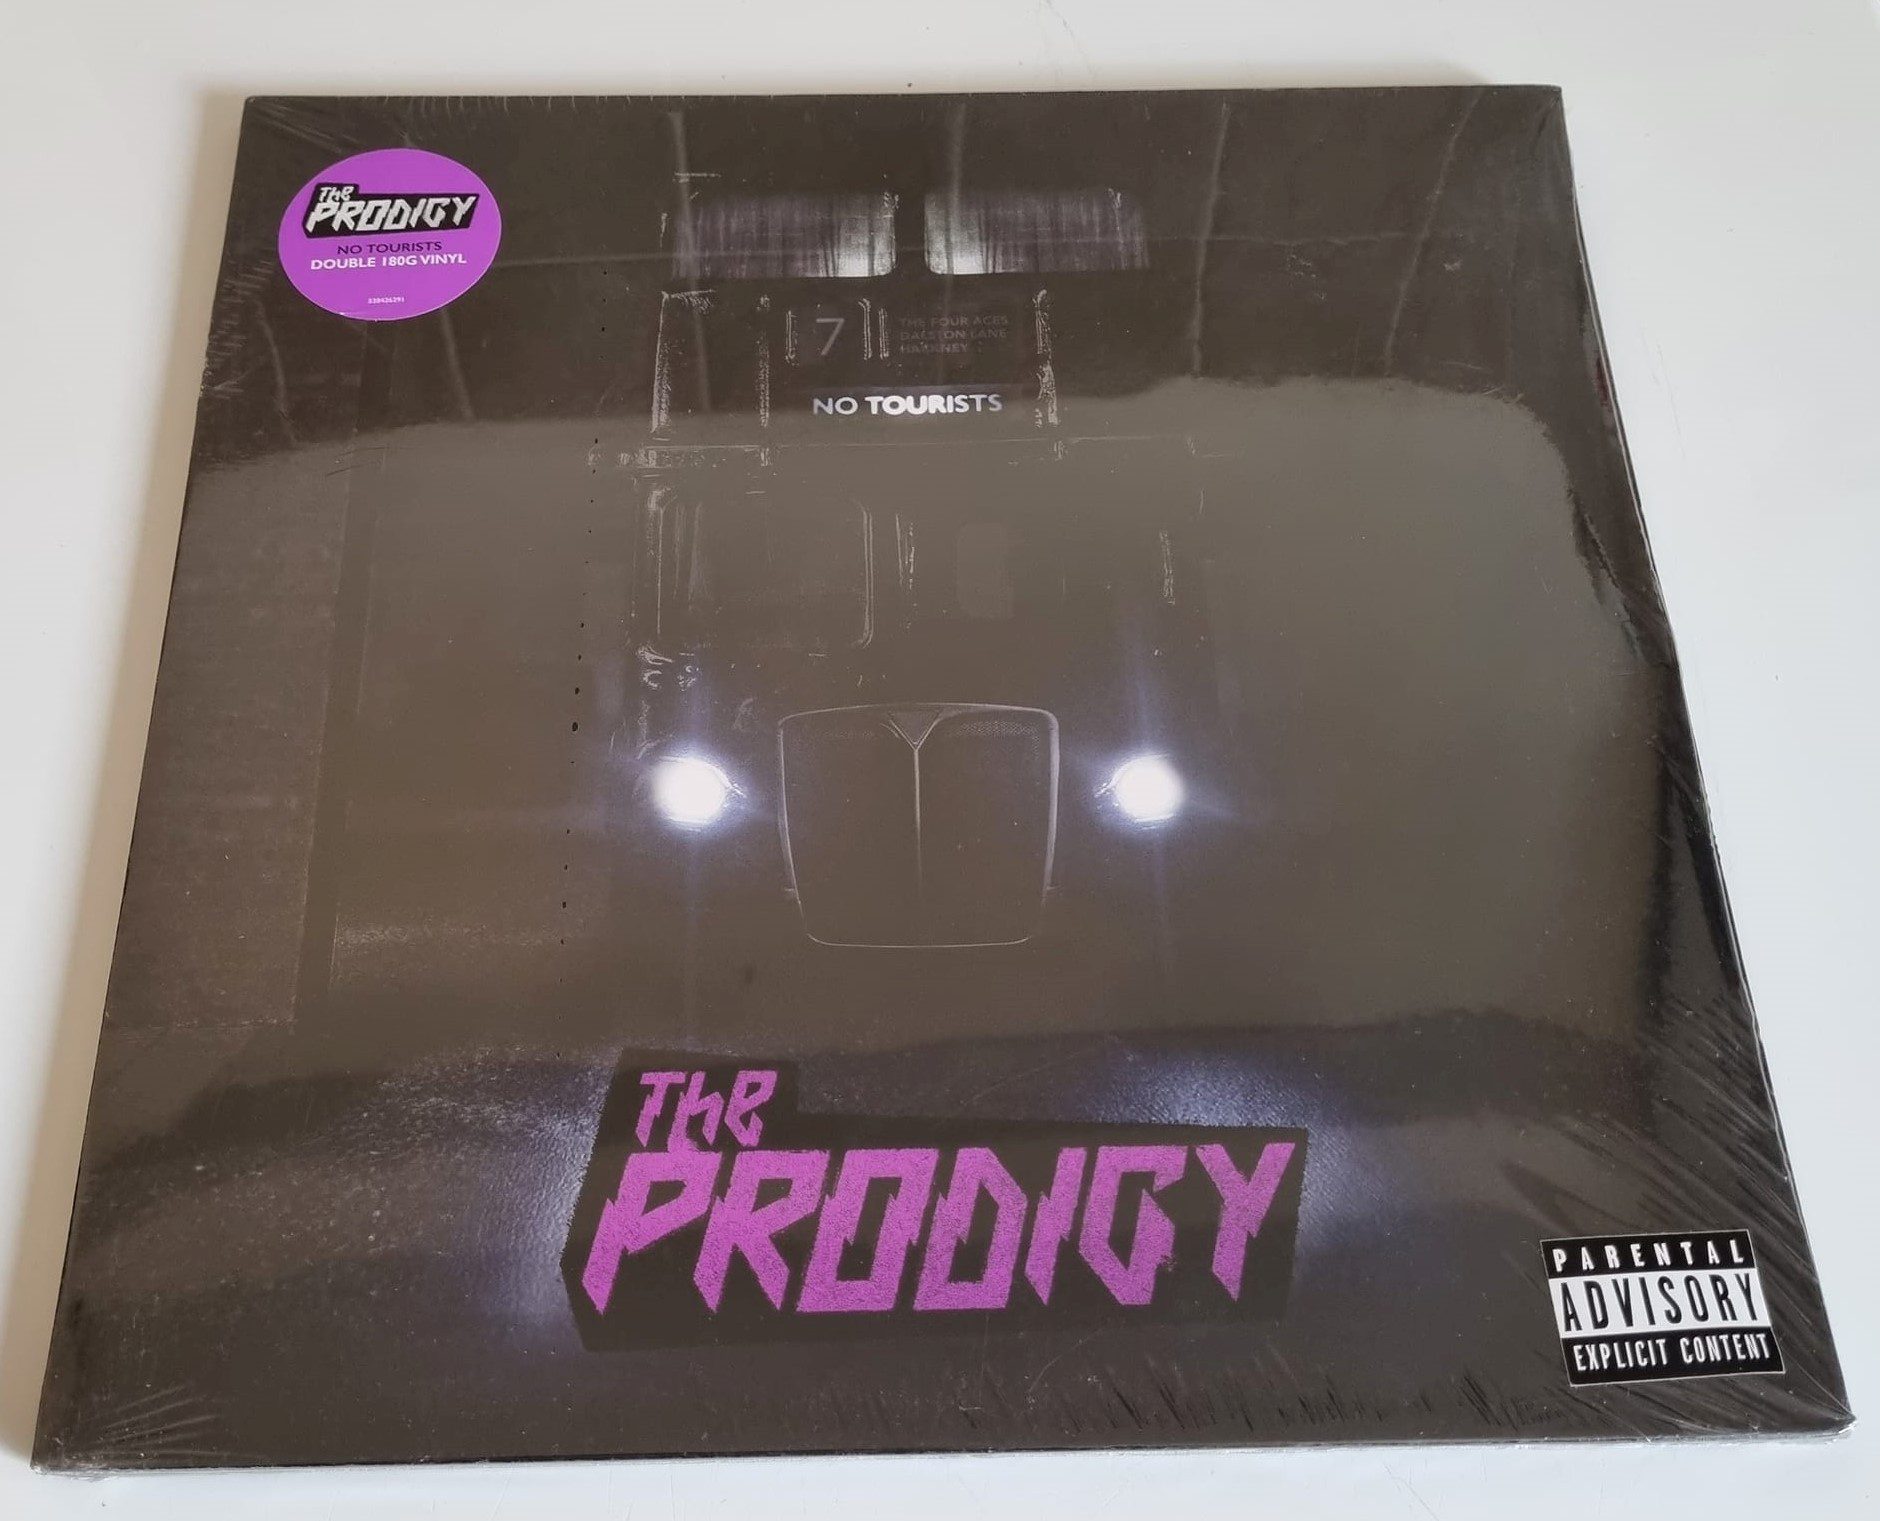 Buy this rare Prodigy record by clicking here